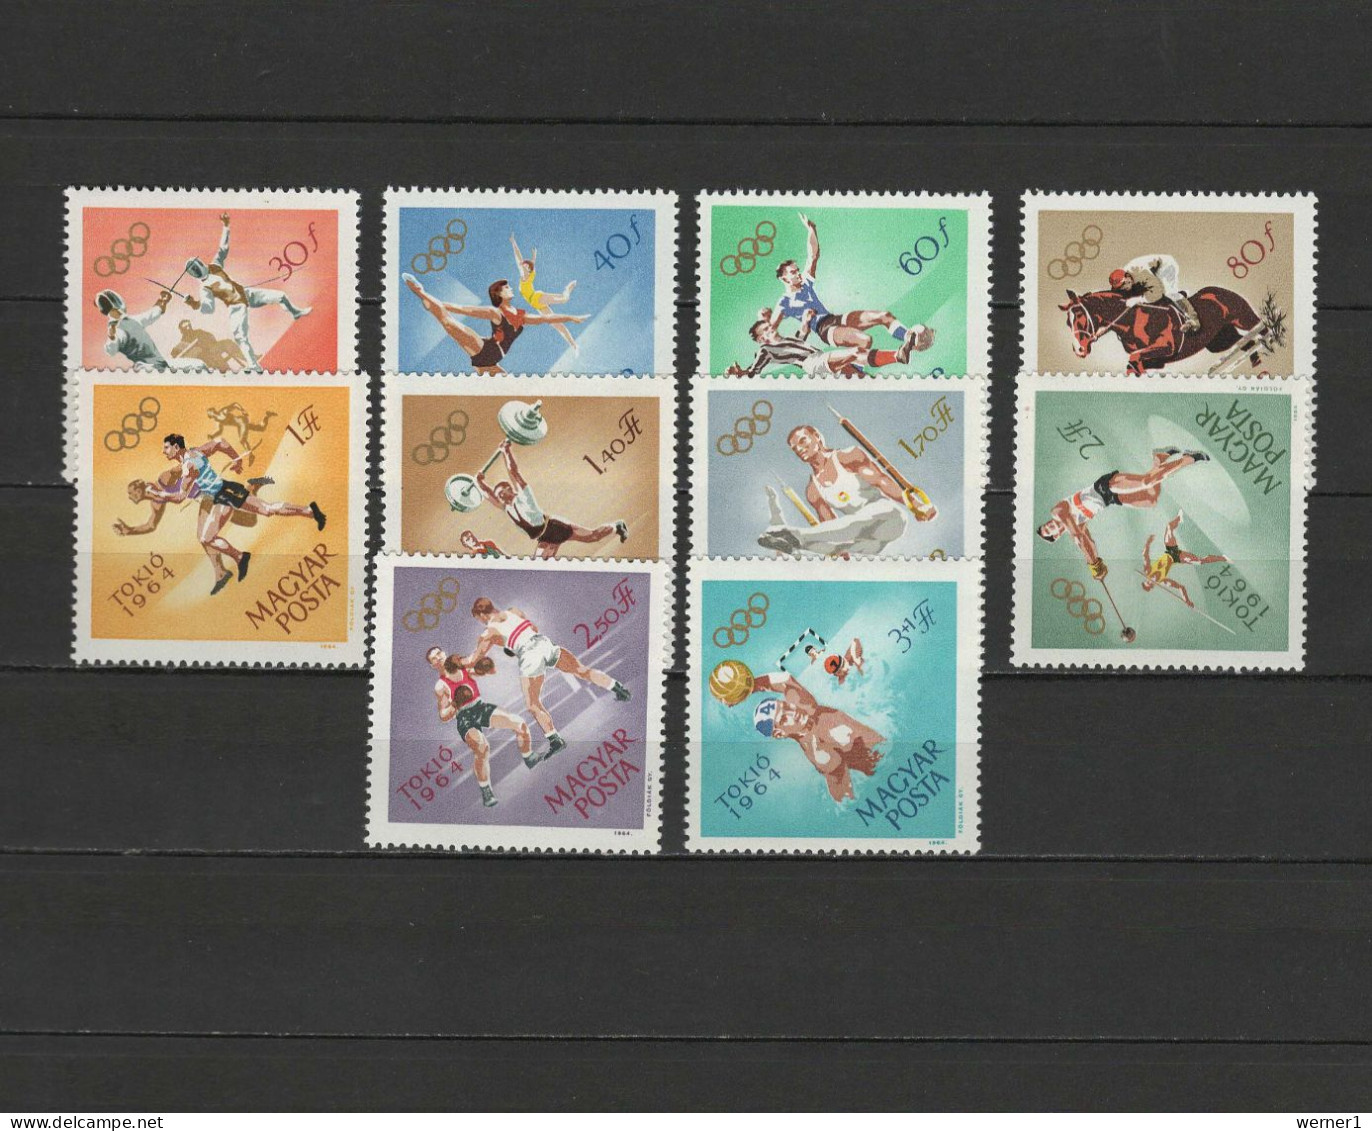 Hungary 1964 Olympic Games Tokyo, Fencing, Football Soccer, Equestrian, Athletics, Boxing Etc. Set Of 10 MNH - Sommer 1964: Tokio